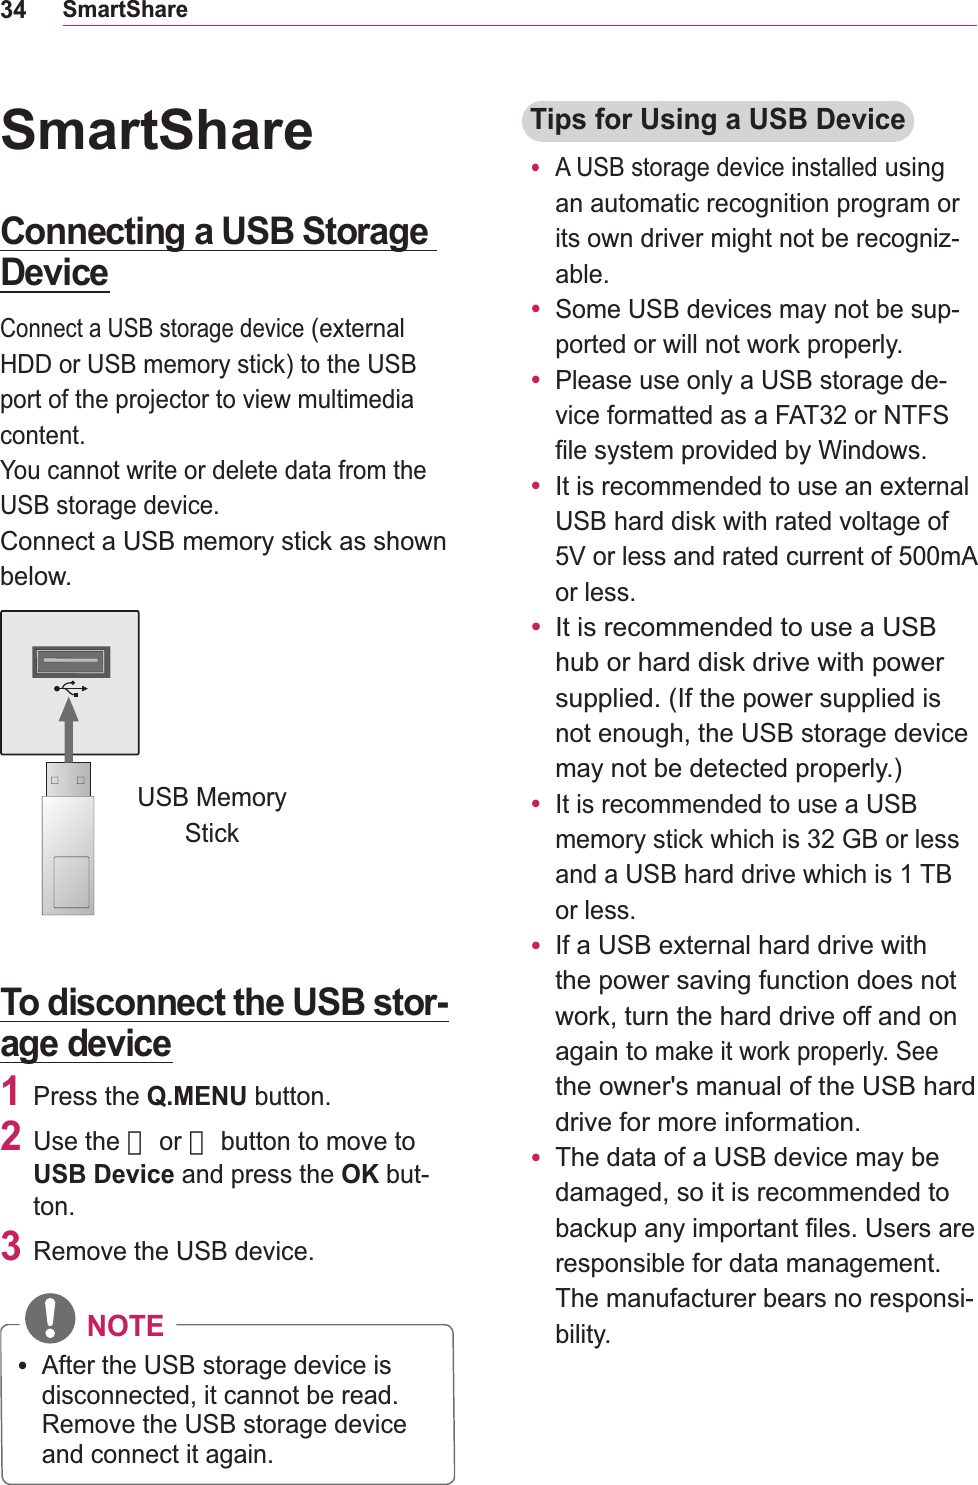 34SmartShareSmartShareConnecting a USB Storage DeviceConnect a USB storage deviceport of the projector to view multimedia content.You cannot write or delete data from the USB storage device.Connect a USB memory stick as shown below.USB Memory StickTo disconnect the USB stor-age device1 Press the Q.MENU button.2 Use the 󱛦 or 󱛧 button to move to USB Device and press the OK but-ton.3  Remove the USB device. NOTEy After the USB storage device is disconnected, it cannot be read. Remove the USB storage device and connect it again.Tips for Using a USB Devicey A USB storage device installed using an automatic recognition program or its own driver might not be recogniz-able.y Some USB devices may not be sup-ported or will not work properly.y Please use only a USB storage de-vice formatted as a FAT32 or NTFS file system provided by Windows.y USB hard disk with rated voltage of or less. y It is recommended to use a USB hub or hard disk drive with power supplied. (If the power supplied is not enough, the USB storage device may not be detected properly.)y It is recommended to use a USB memory stick which is 32 GB or less or less.y If athe power saving function does not work, turn the hard drive off and on again to make it work properly. See the owner&apos;s manual of the USB hard drive for more information.y The data of a USB device may be damaged, so it is recommended to backup any important files. Users are responsible for data management. The manufacturer bears no responsi-bility.